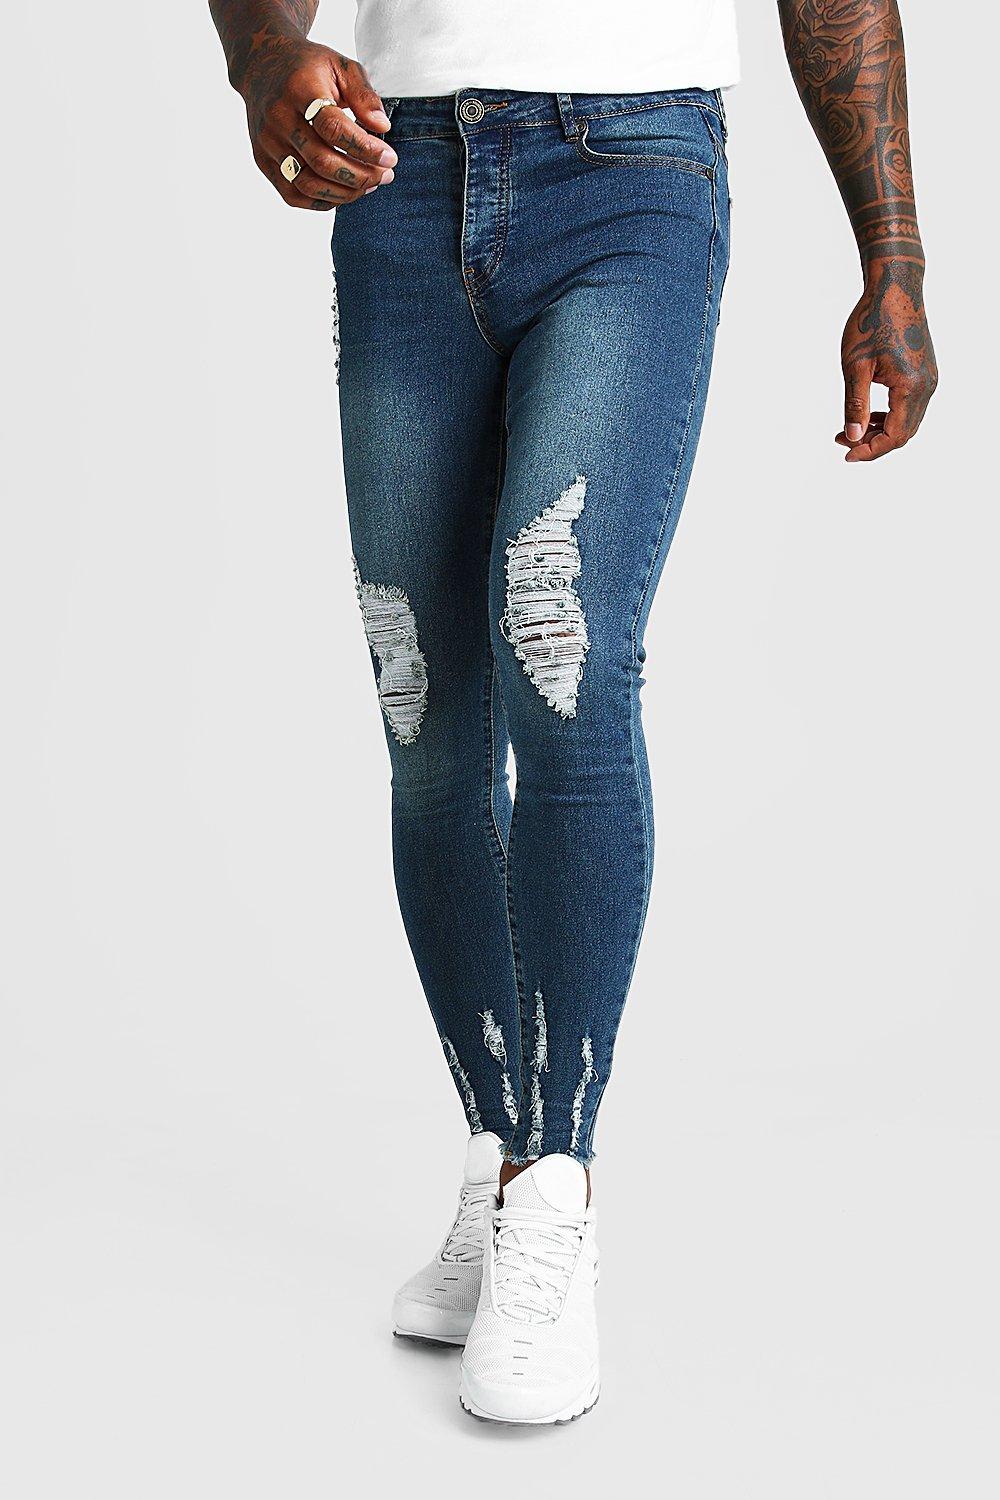 best madewell jeans